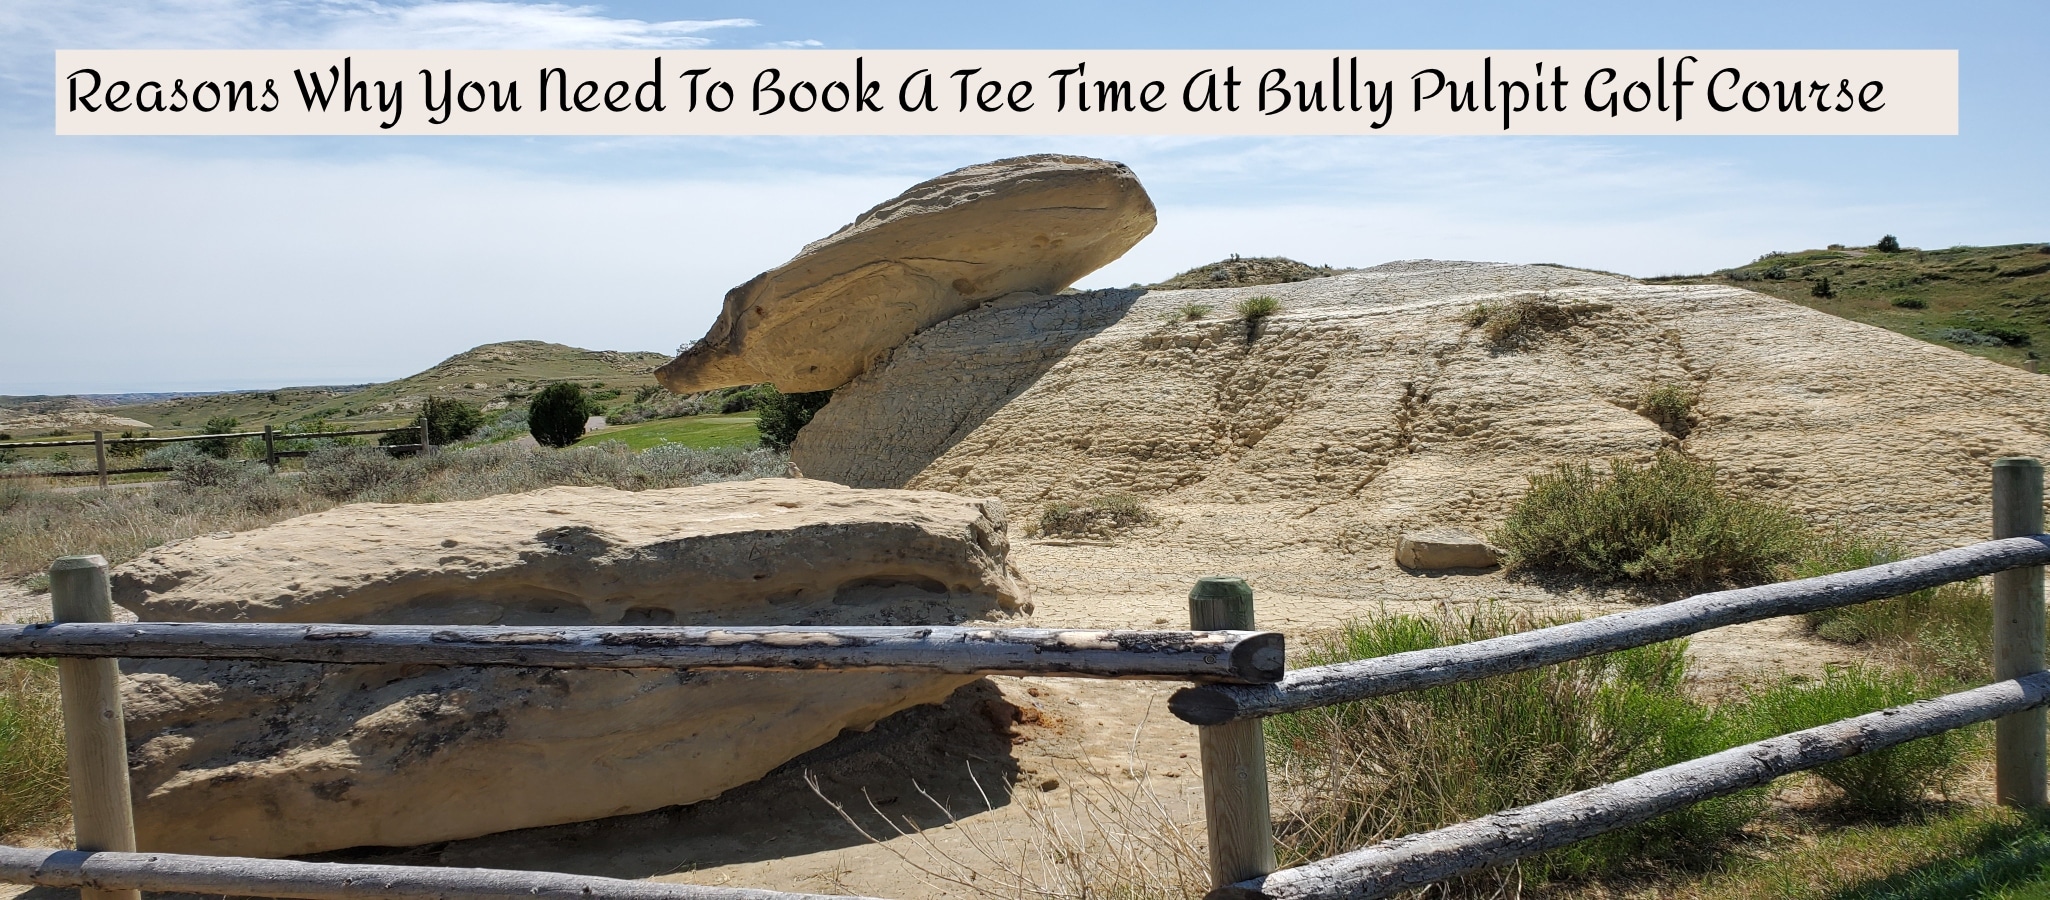 7 Reasons Why You Need To Book A Tee Time At Bully Pulpit Golf Course In Medora